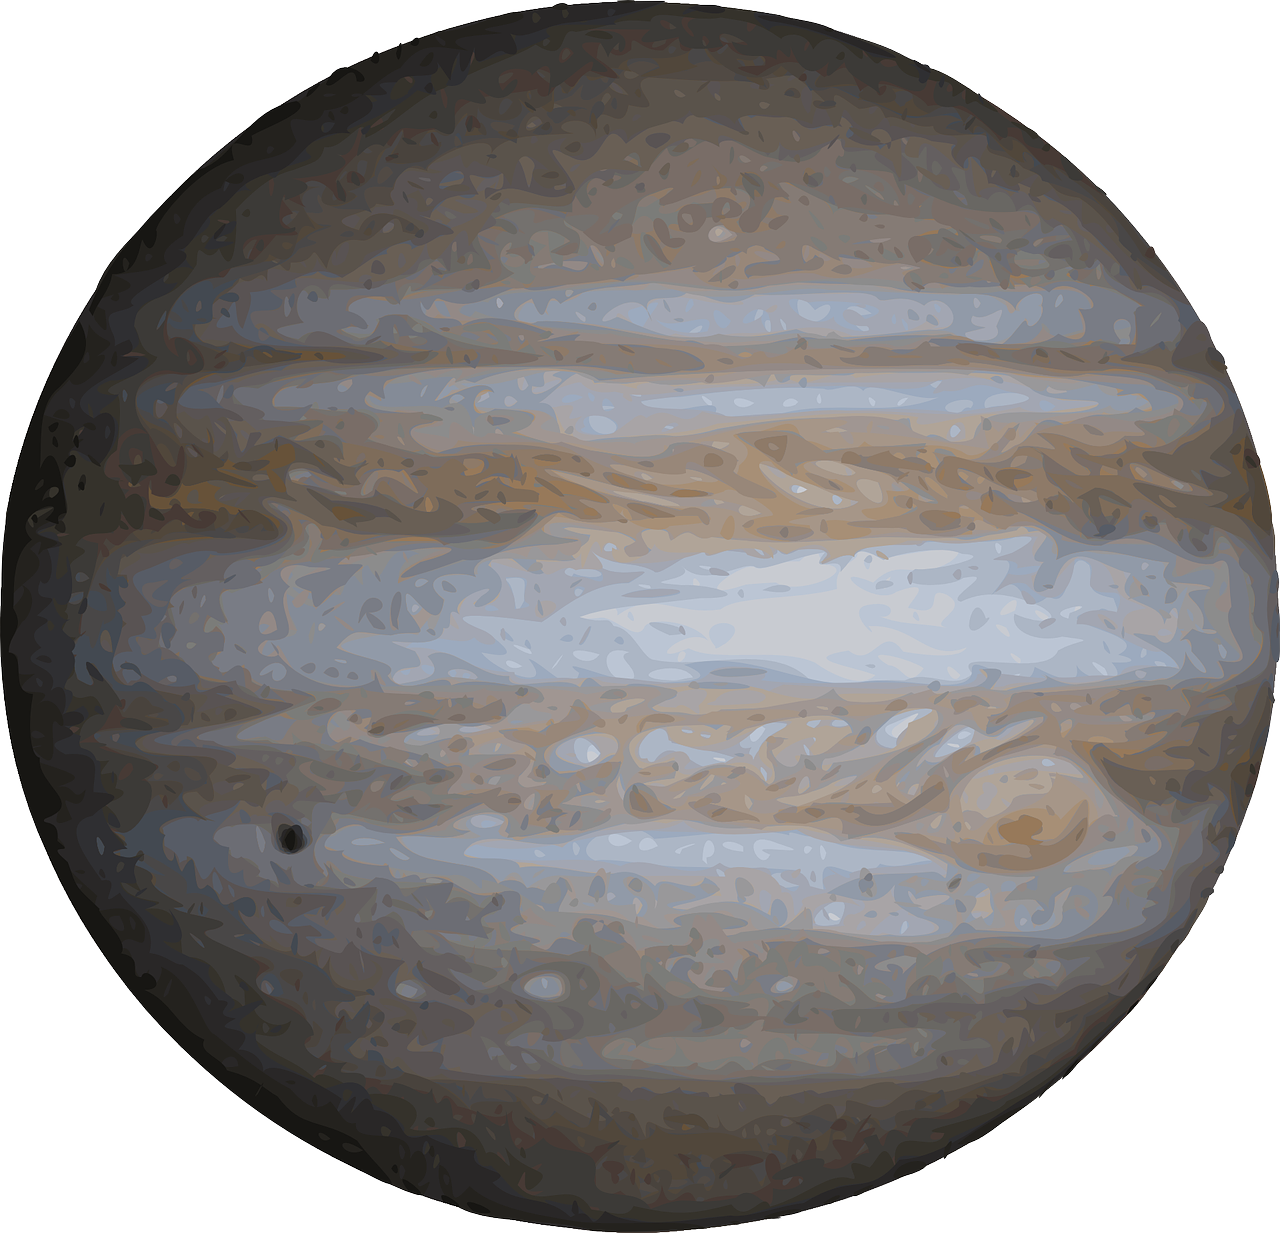 drawing of the planet jupiter